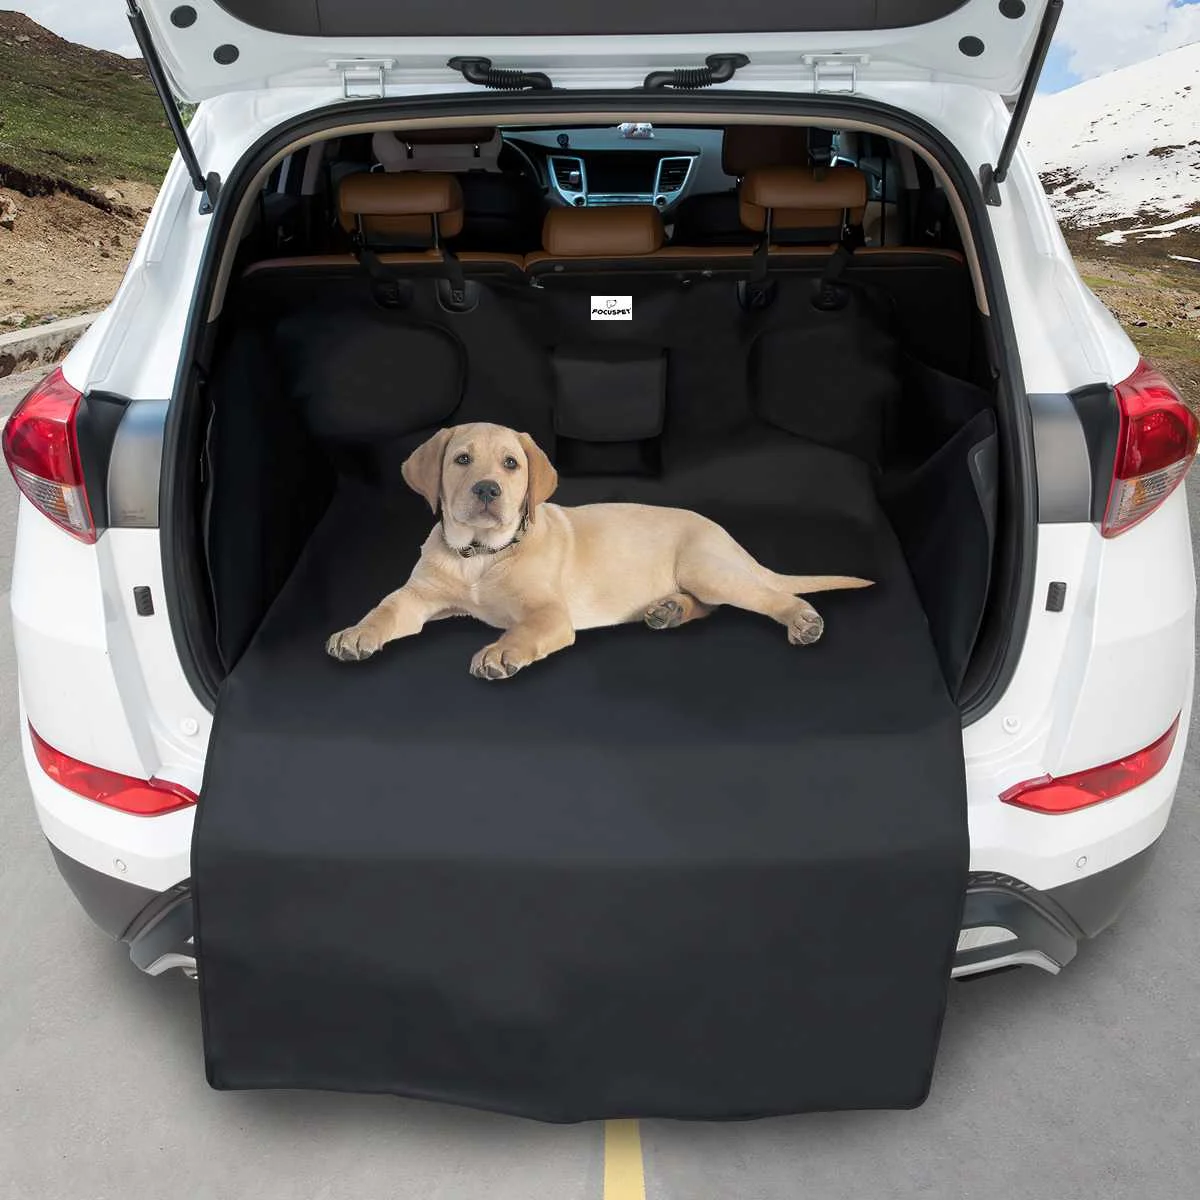 ME & MY PET CAR BOOT LINER/REAR SEAT COVER PROTECTOR SPILL PROOF DOG PUPPY 4x4 